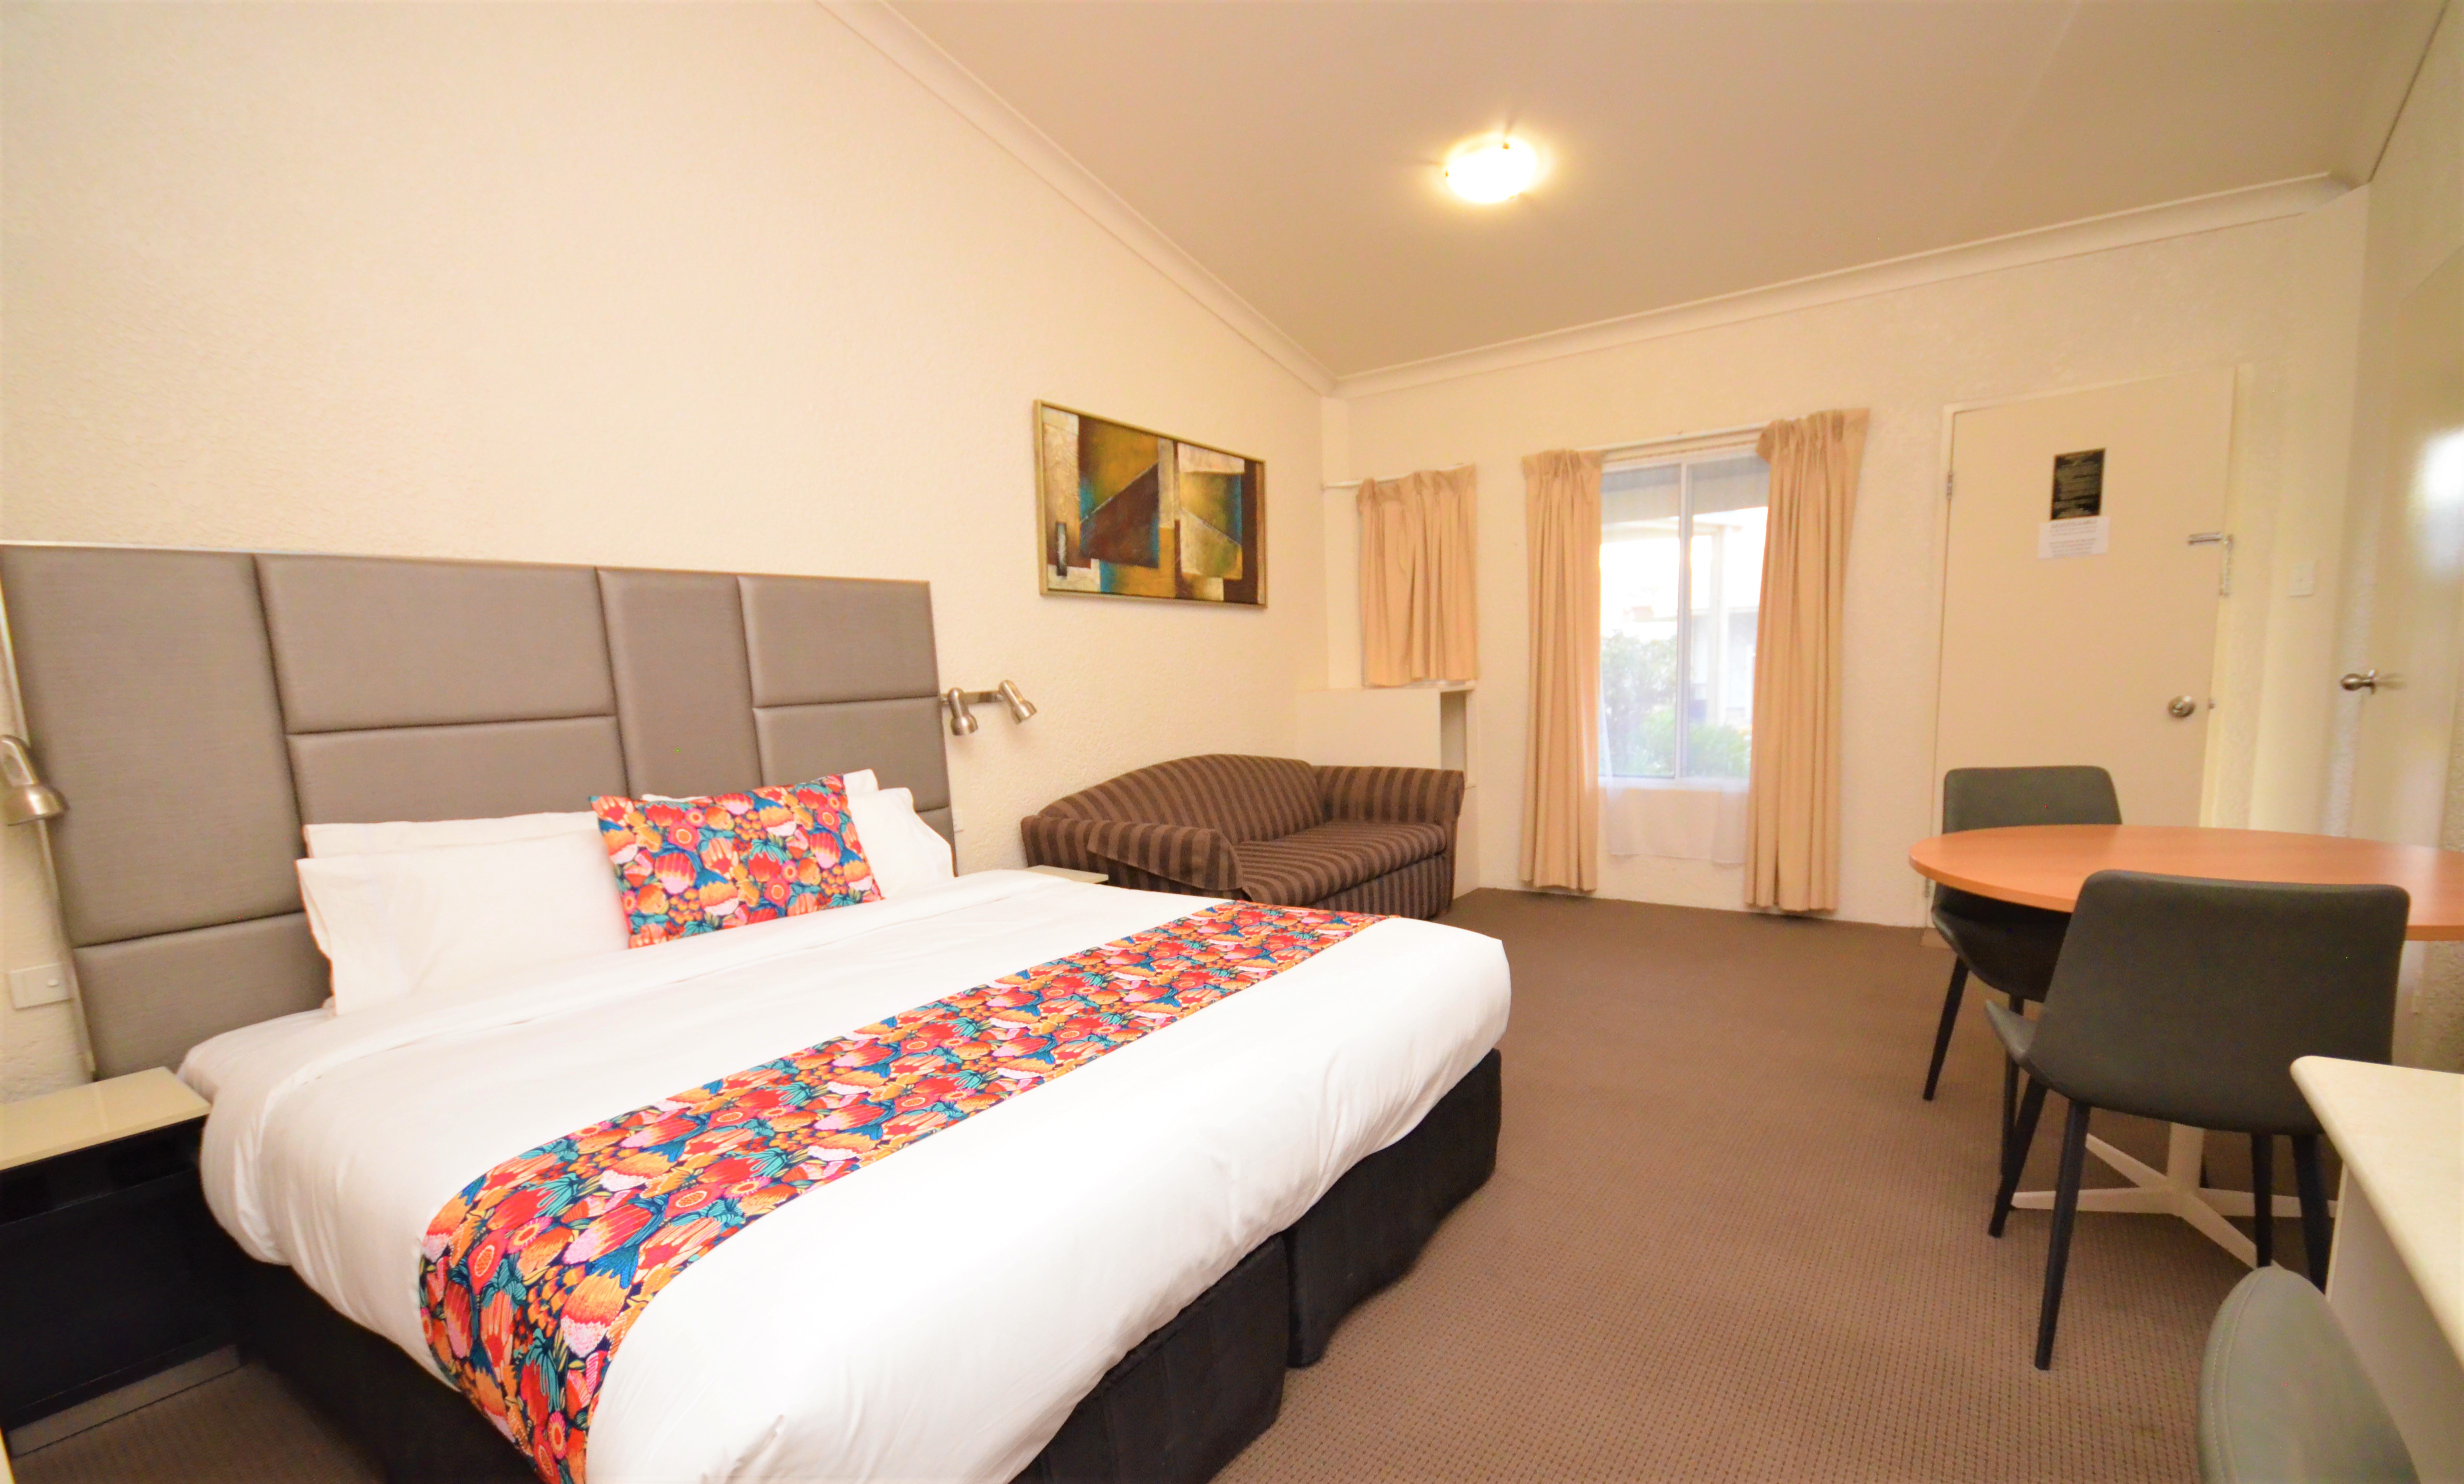 Whatever your reason for coming to Wagga, this four star motel accommodates everyone - Accommodation Wagga Wagga